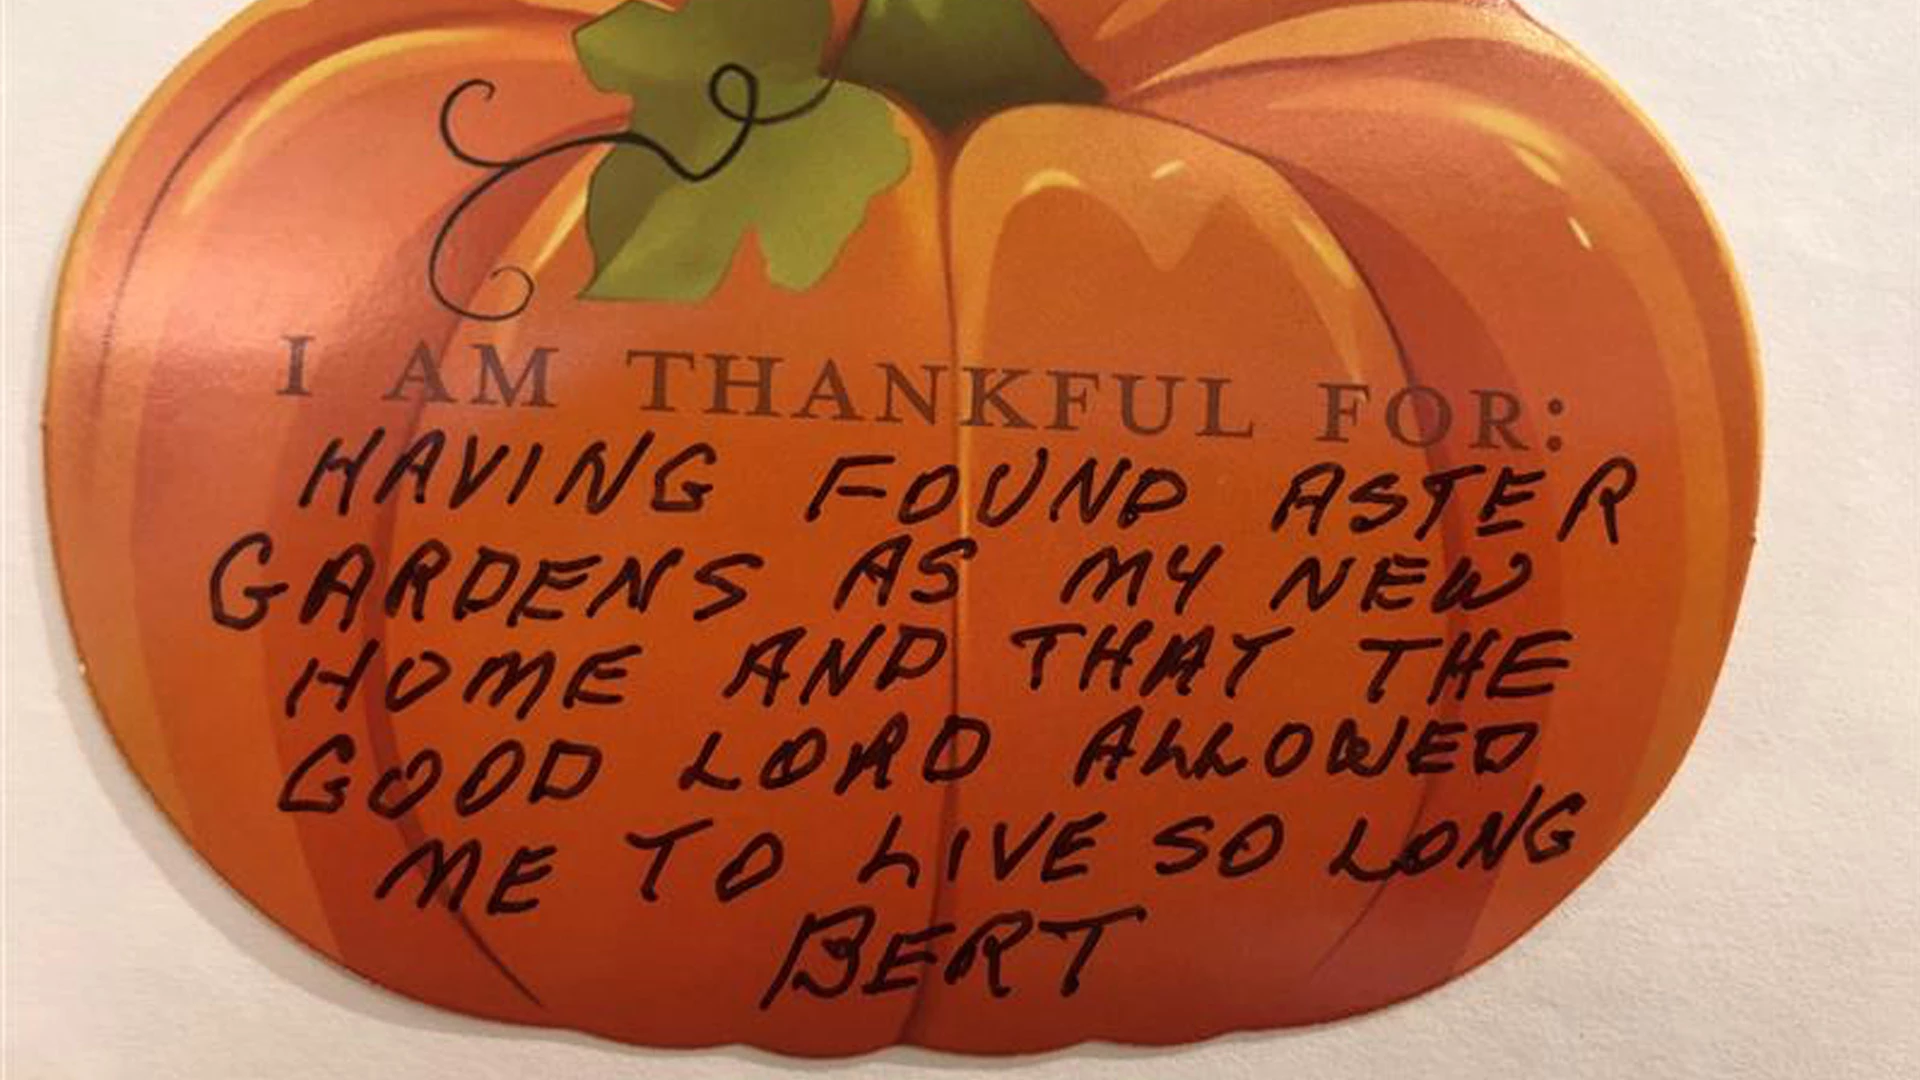 A pumpkin with a Thankful note on Thanksgiving Day